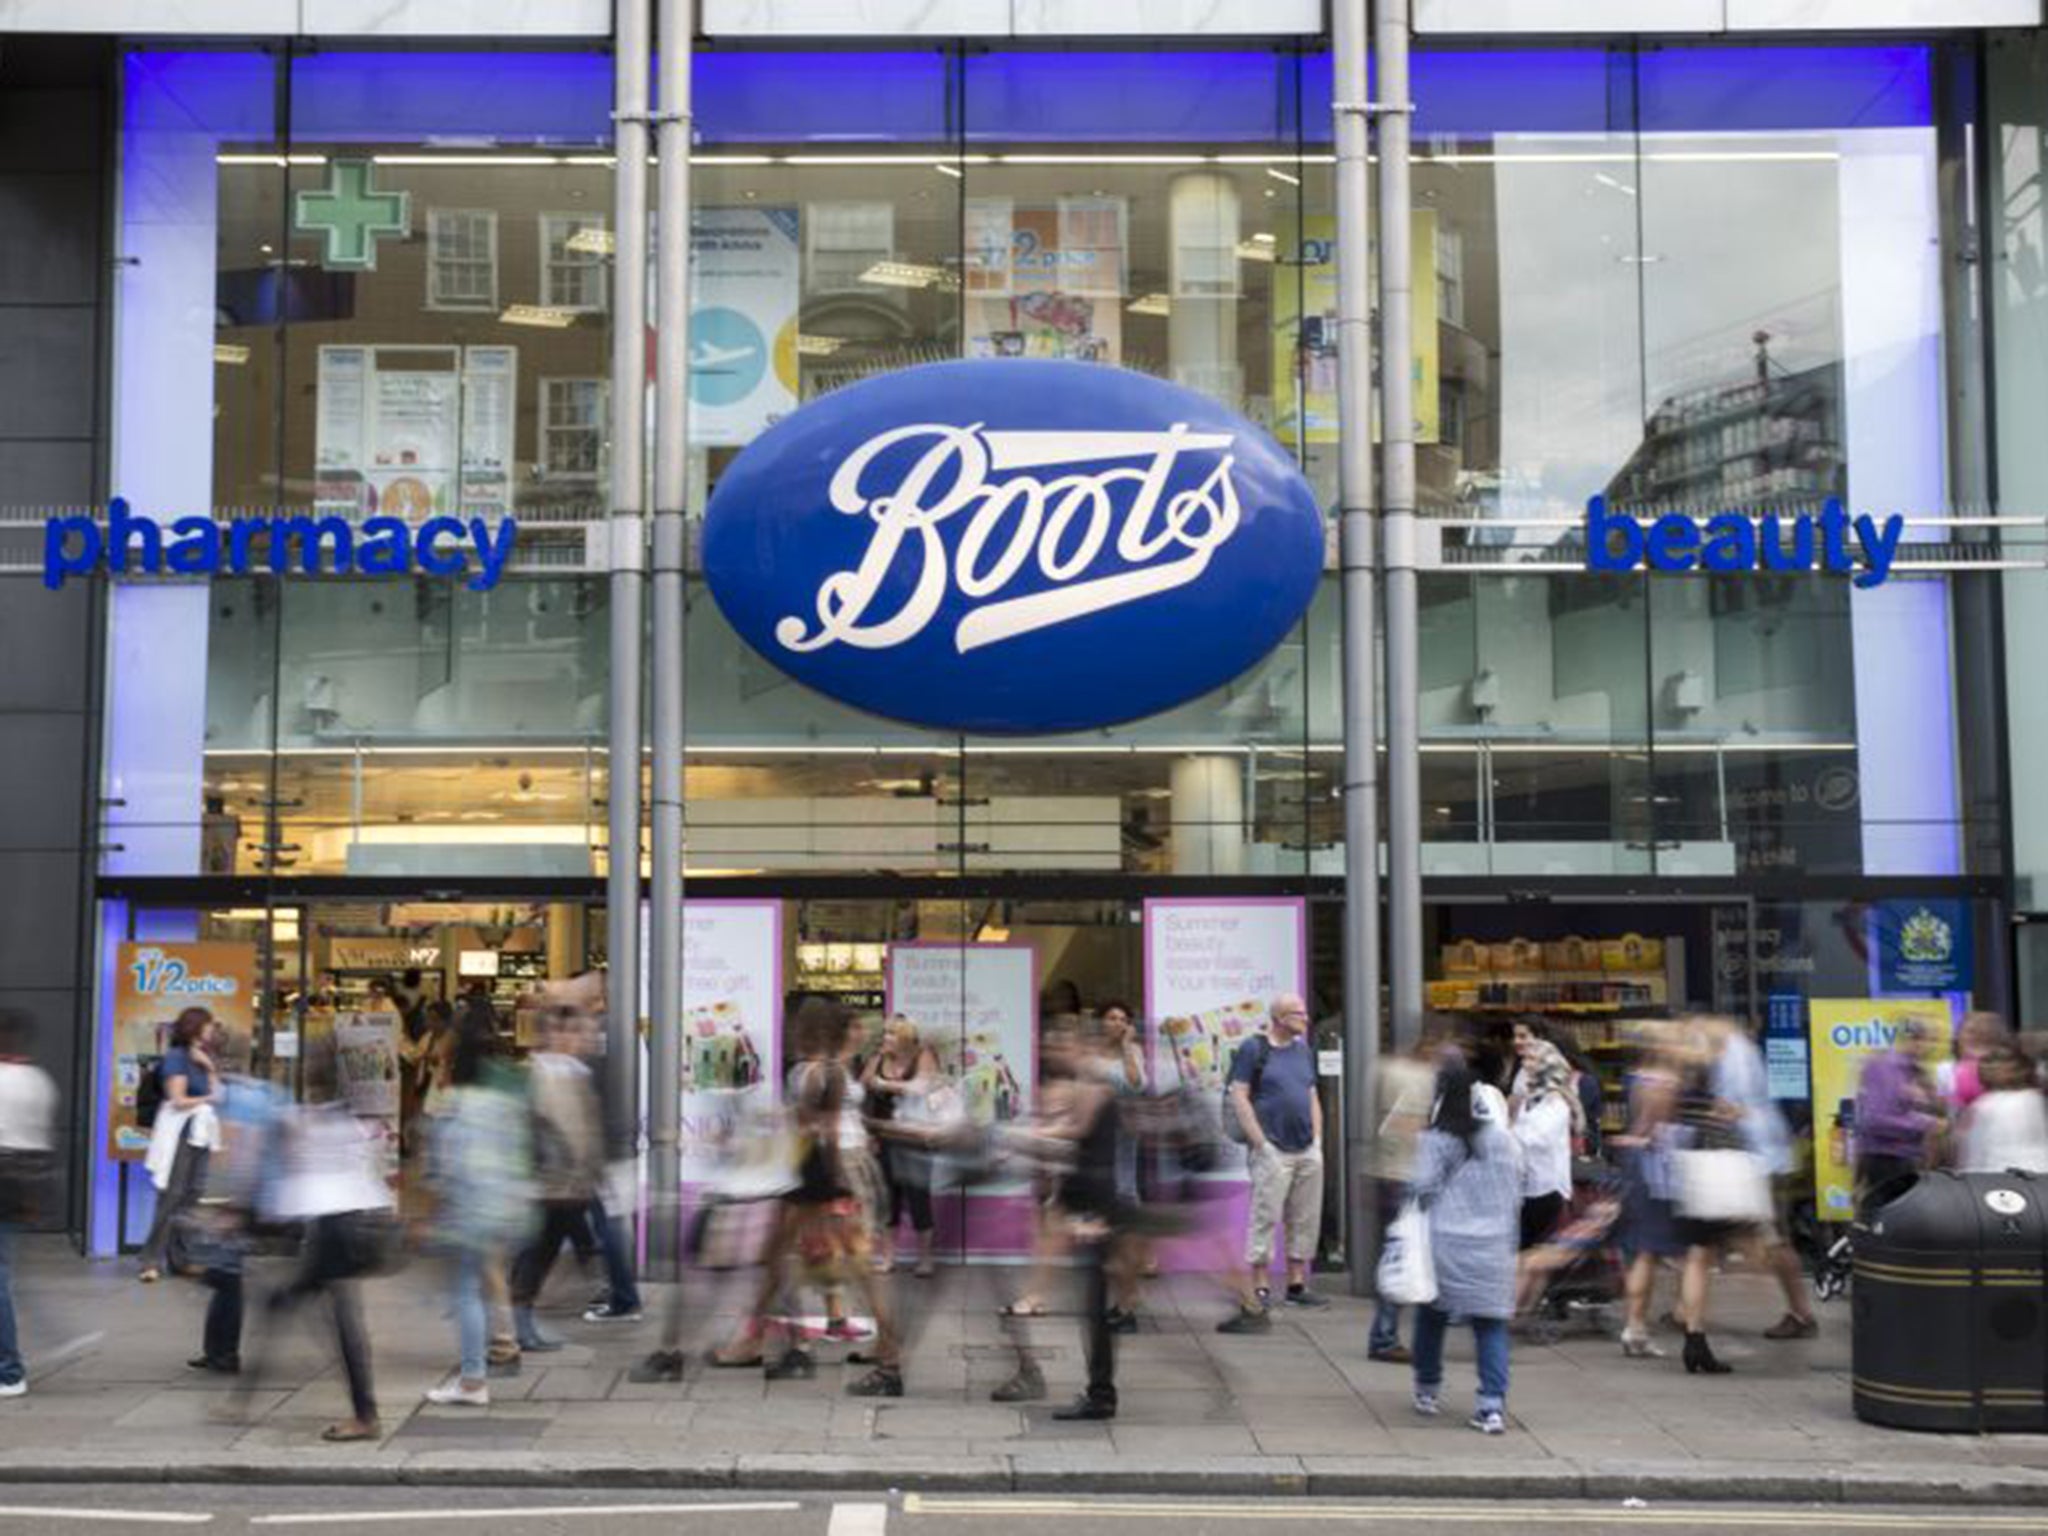 Campaign groups estimate that Boots has avoided up to £1.3bn of UK tax (Getty)